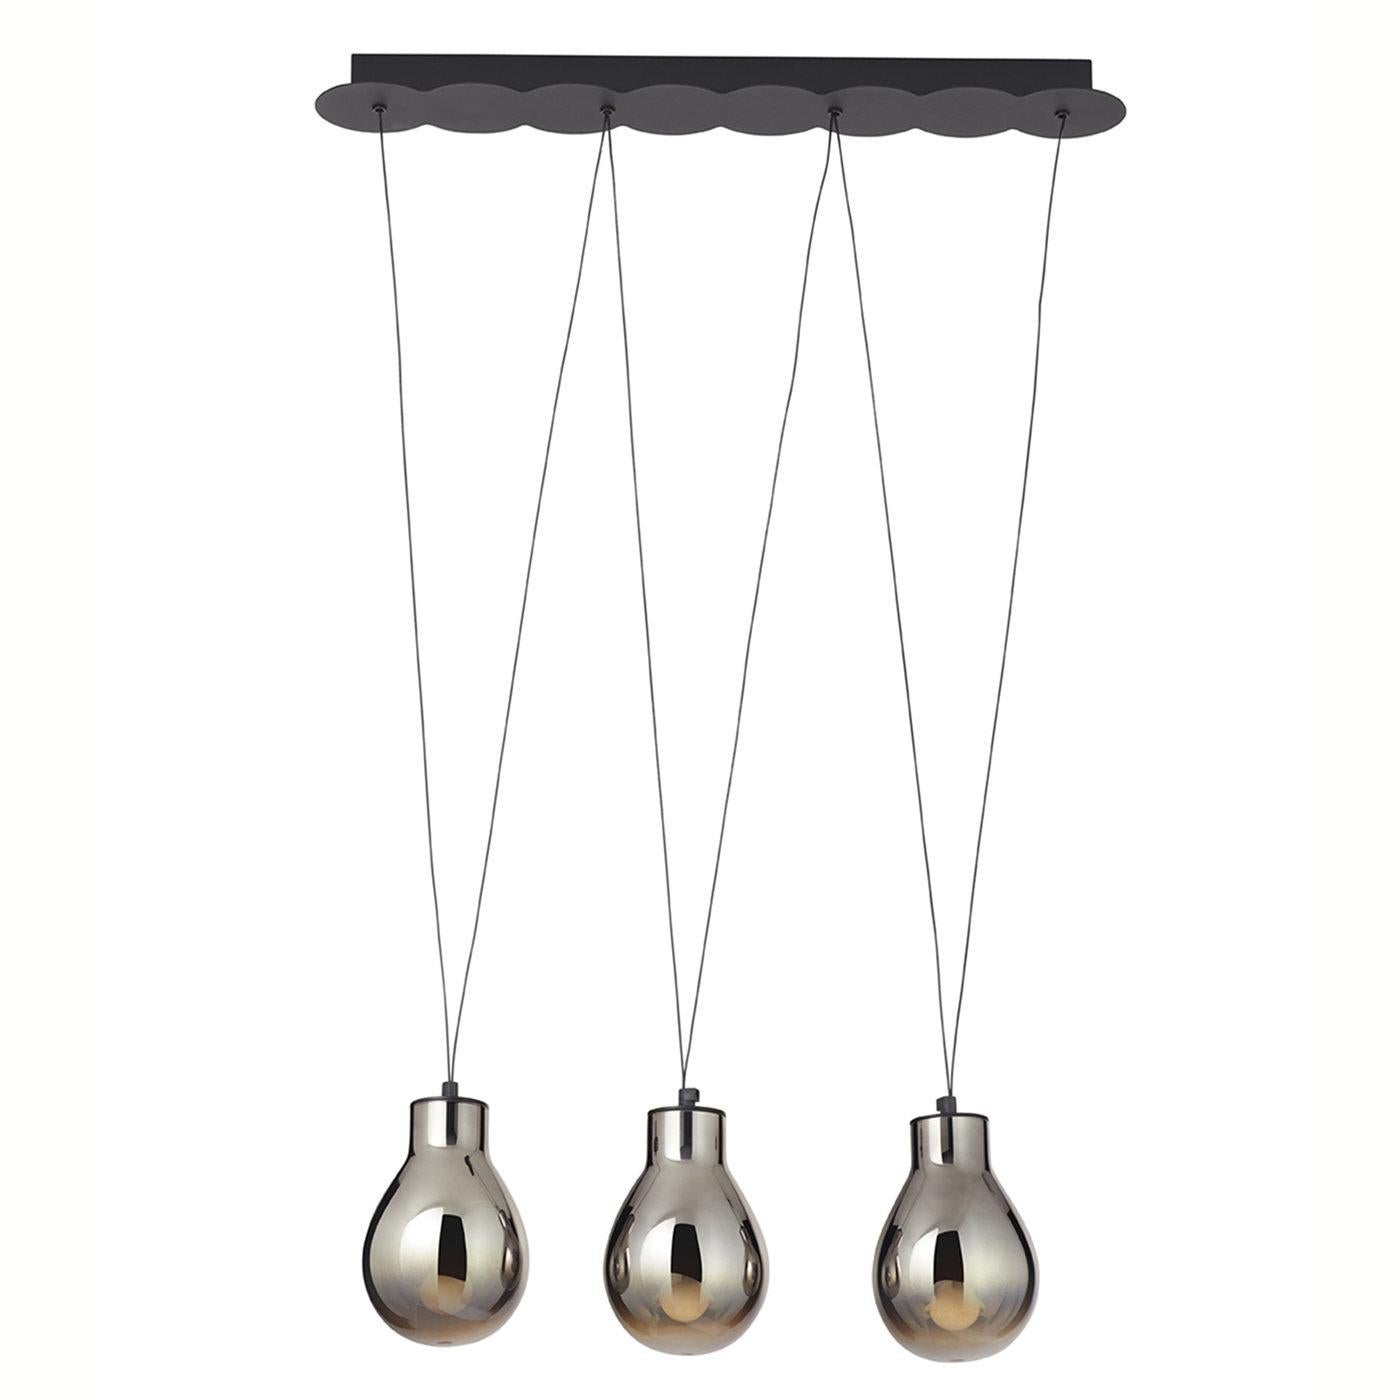 Just like raindrops drawing evanescent yet unforgettable figures through the sky, this pendant lamp will create a singular, captivating ambiance in a contemporary interior. Suspended on a matte black metal ceiling bar, three V-shaped threads lightly